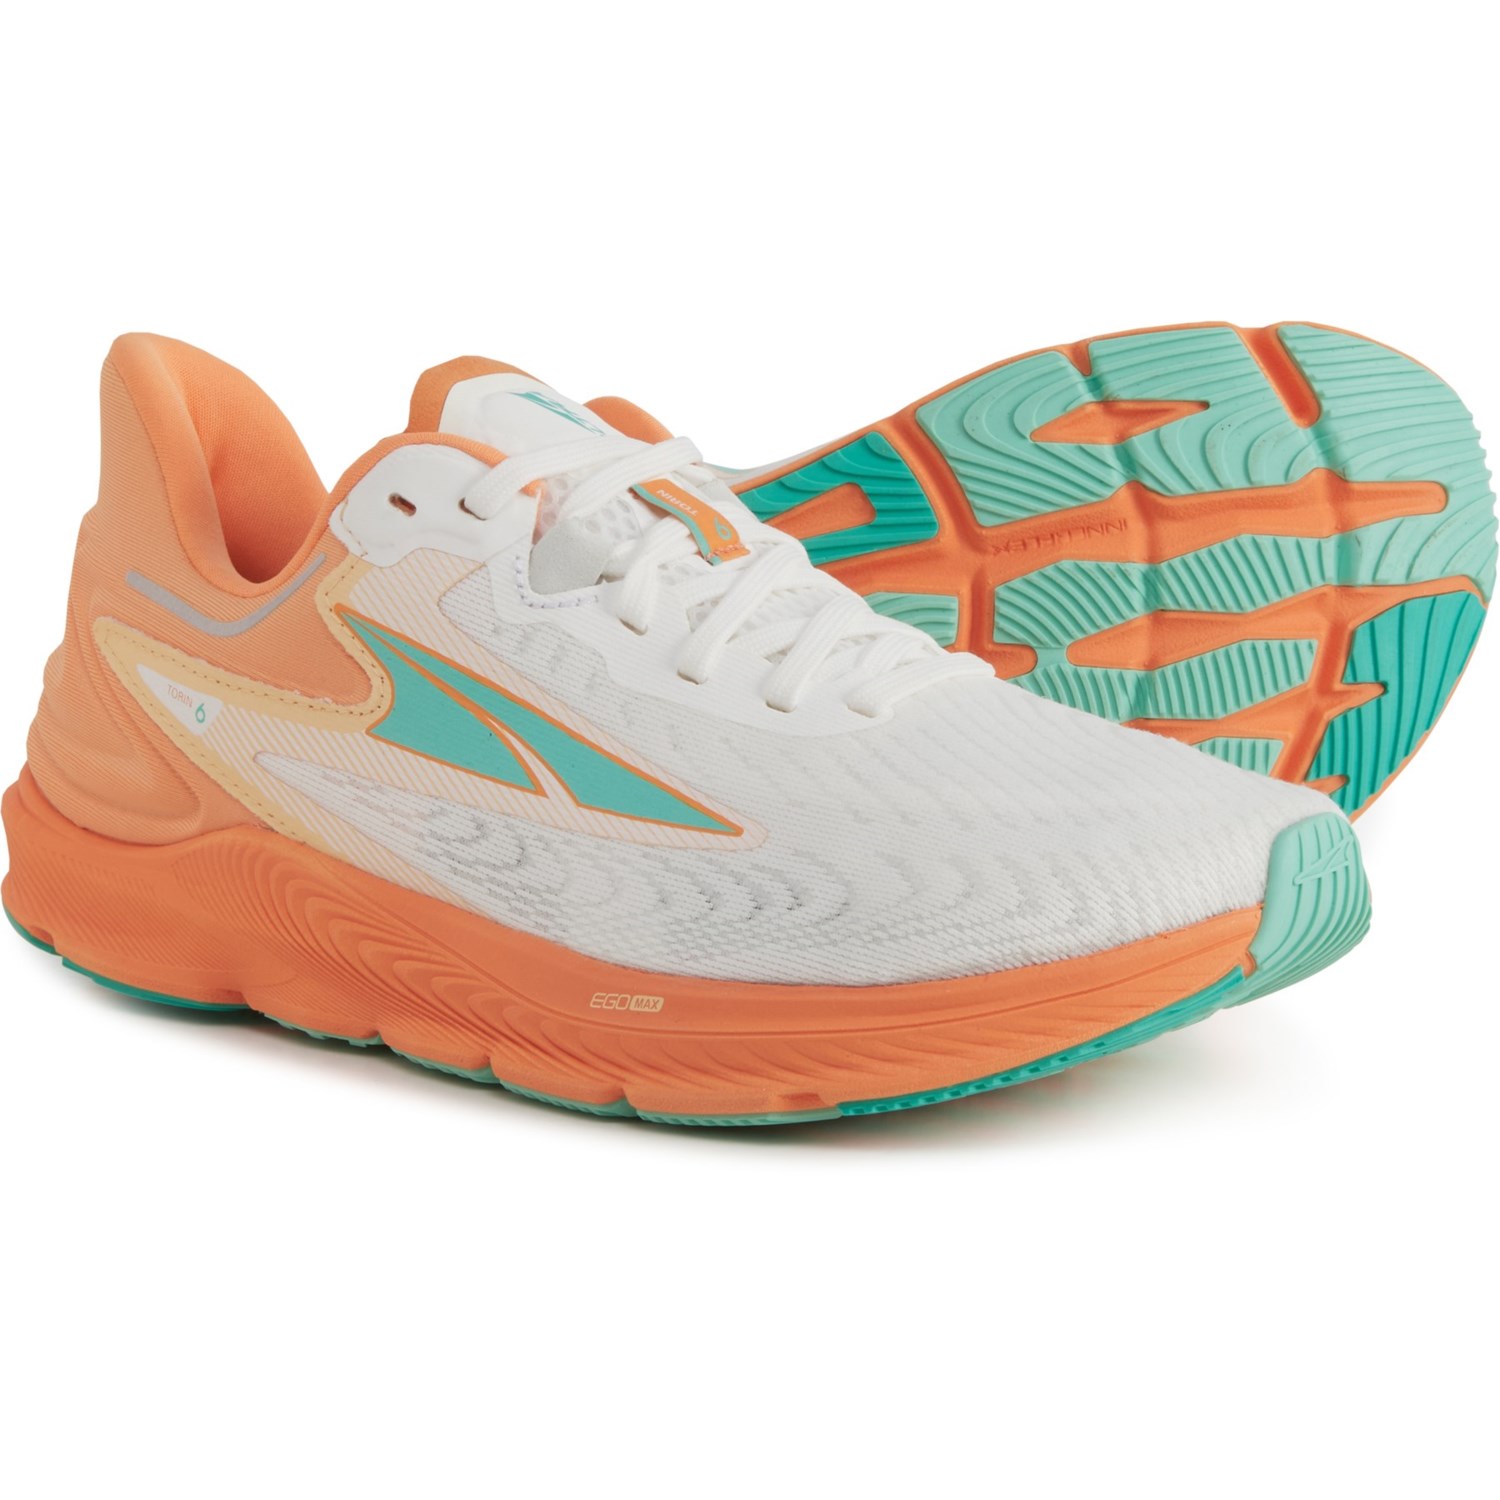 Altra Torin 6 Running Shoes (For Women) - Save 42%